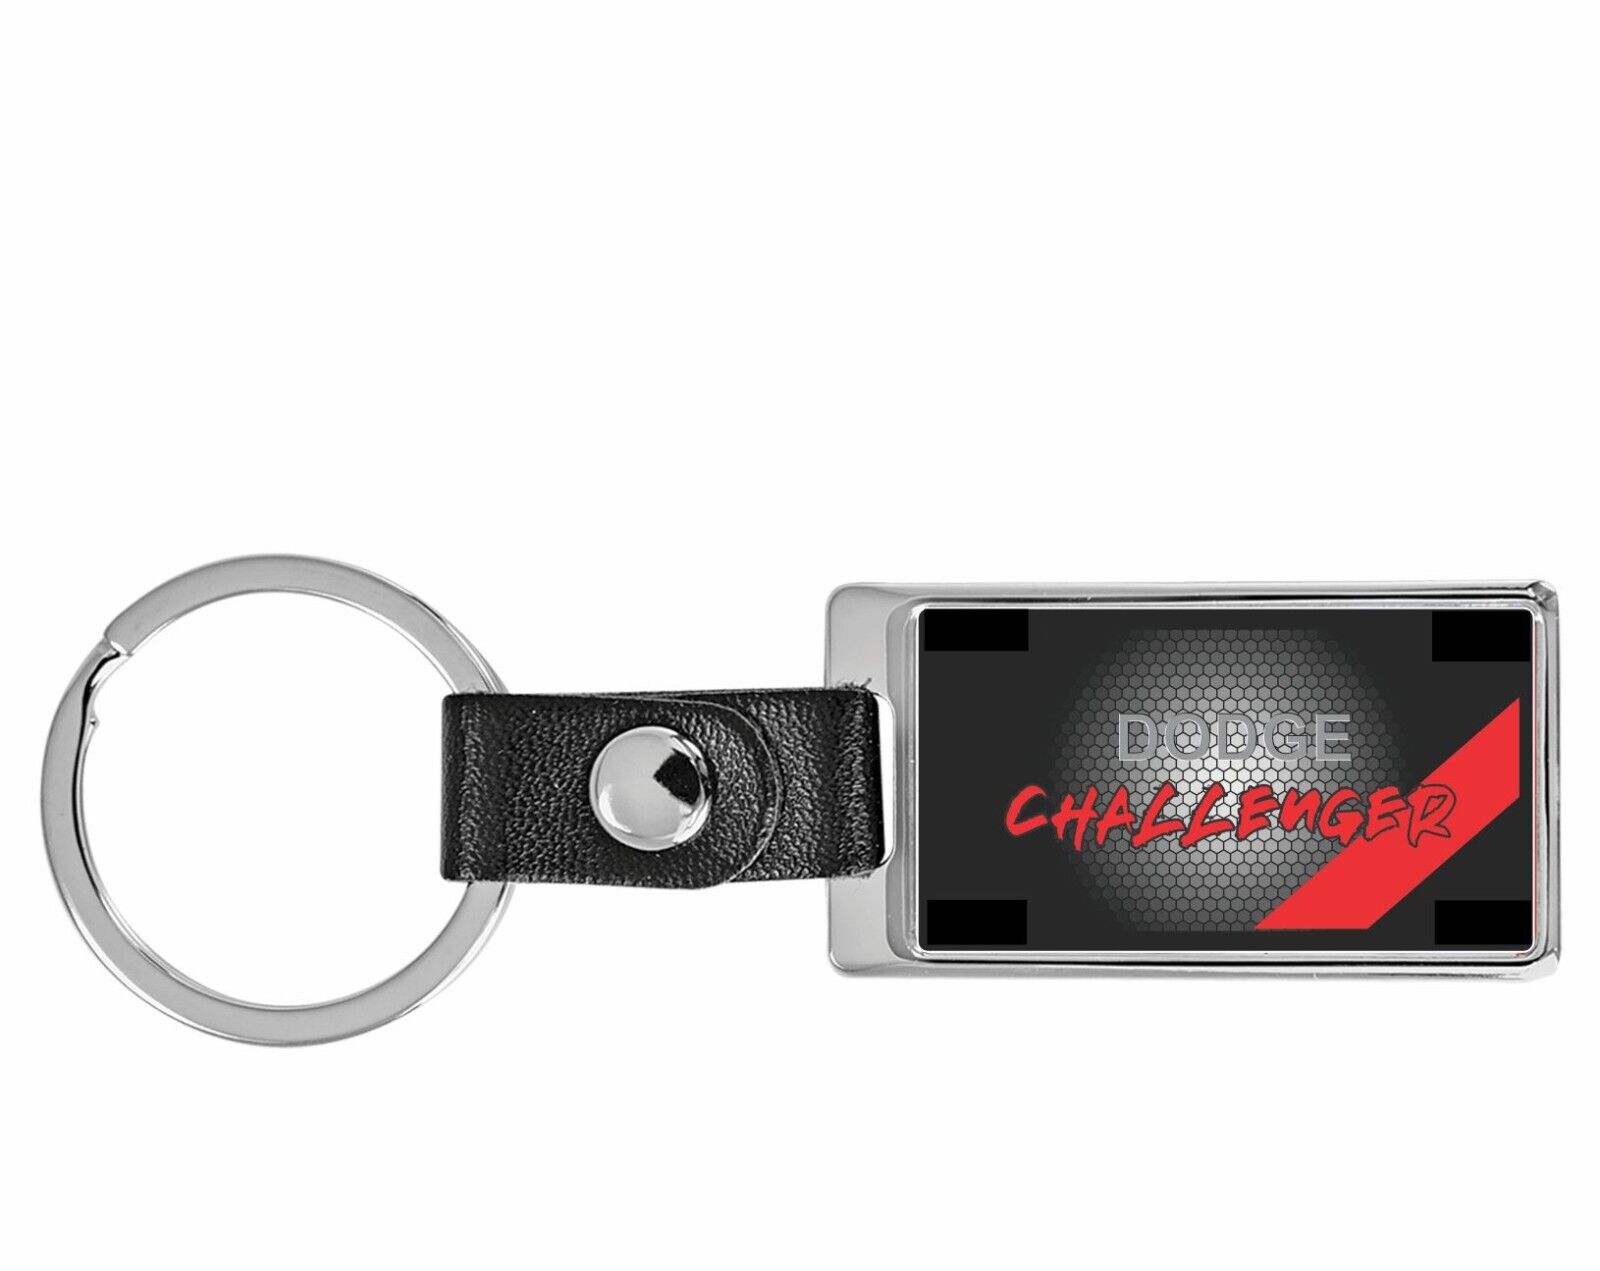 dodge Challenger Car Chrome Leather key ring  Key Chain Fob Luxury cars